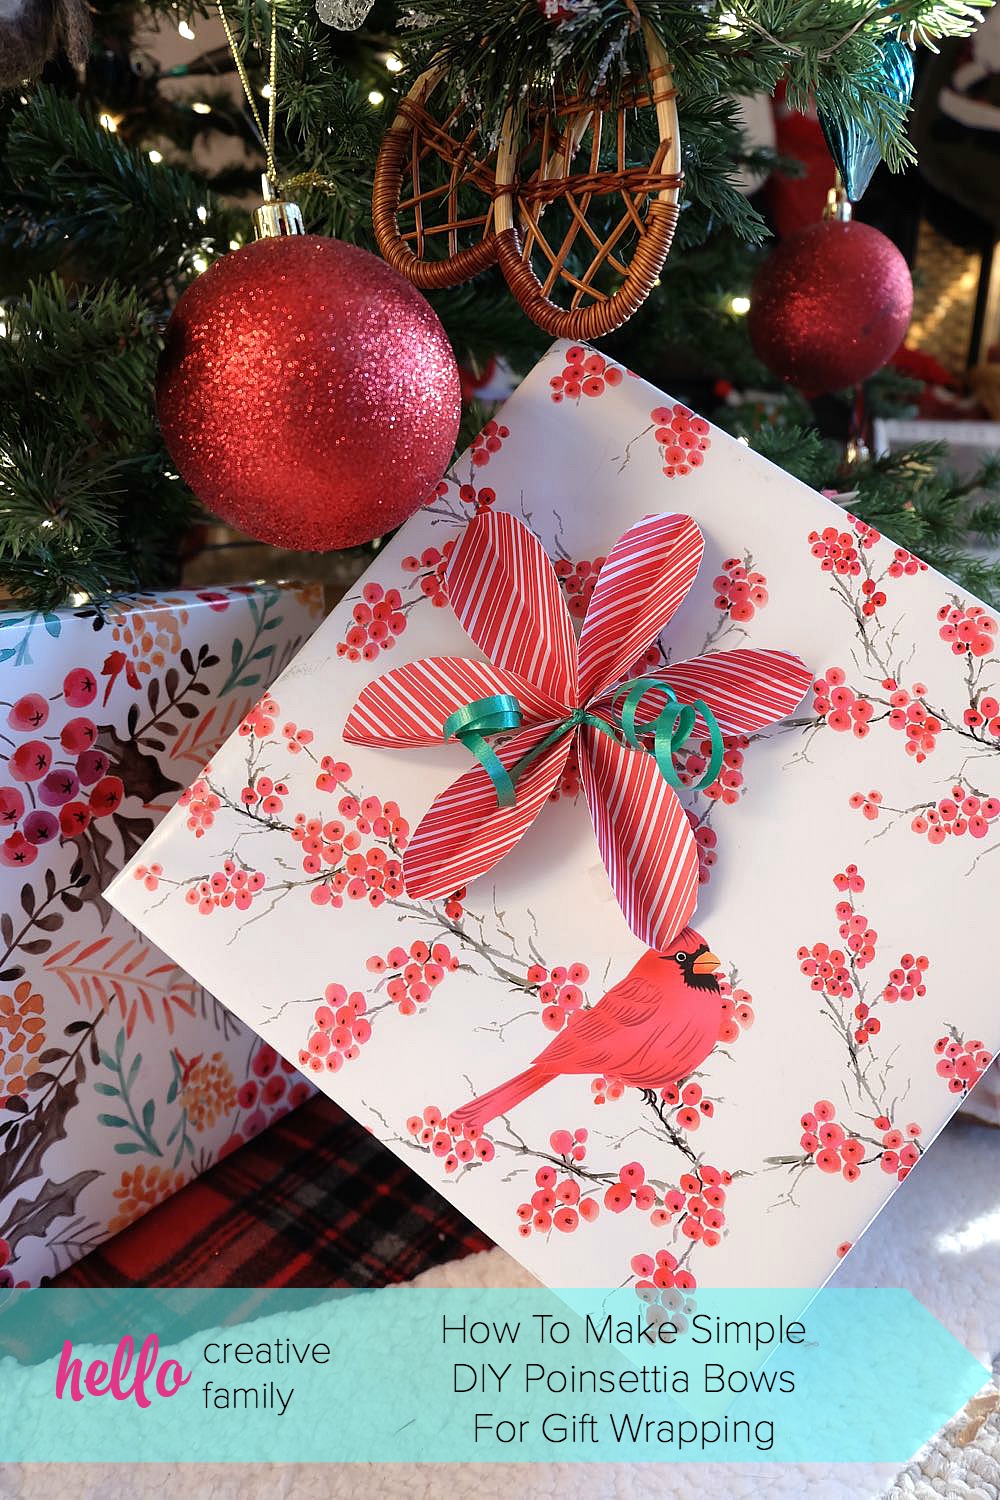 Skip the store bought bows and DIY them instead! Learn How To Make Super Simple DIY Poinsettia Bows For Gift Wrapping. They are so easy and perfect for wrapping Christmas gifts!